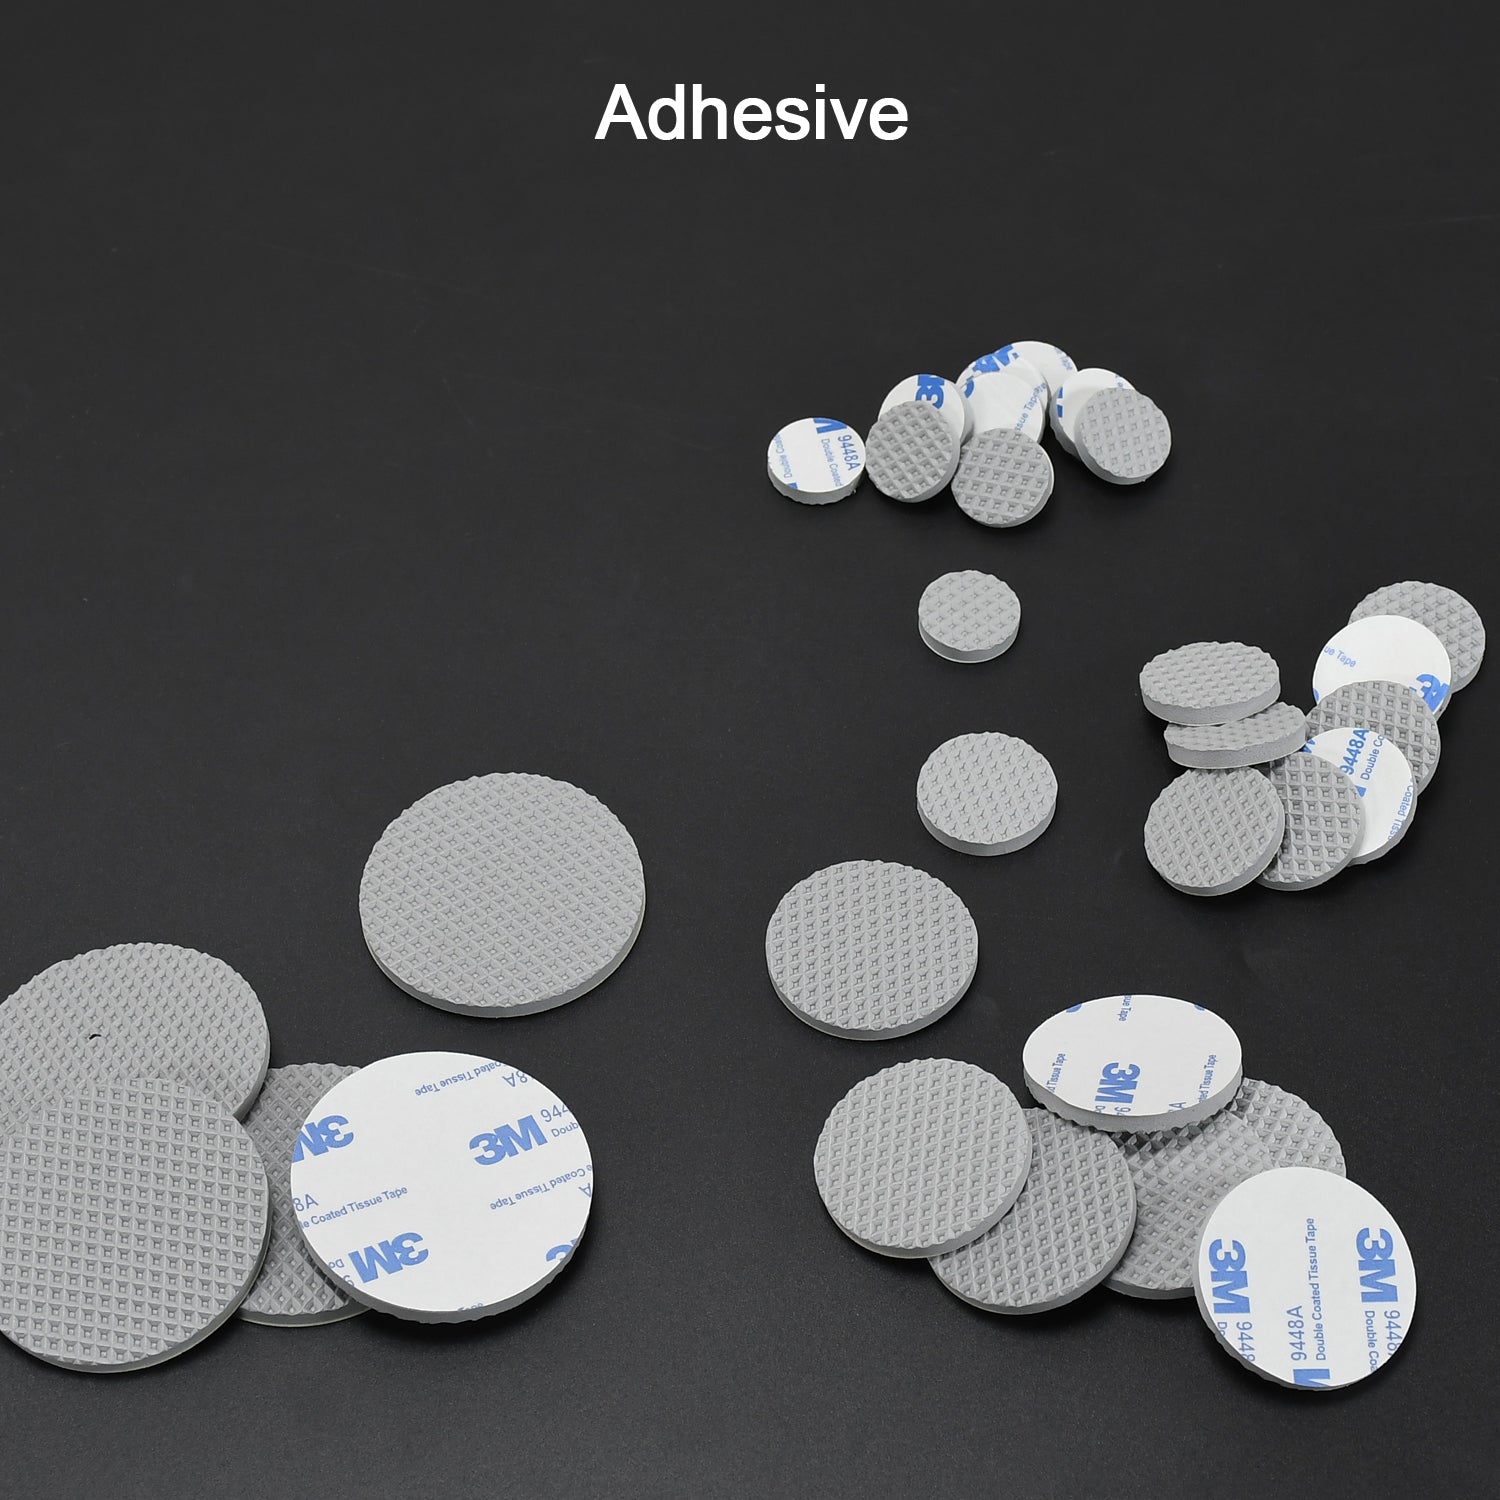 9030A FURNITURE PAD ROUND  FELT PADS FLOOR PROTECTOR PAD FOR HOME & ALL FURNITURE USE DeoDap